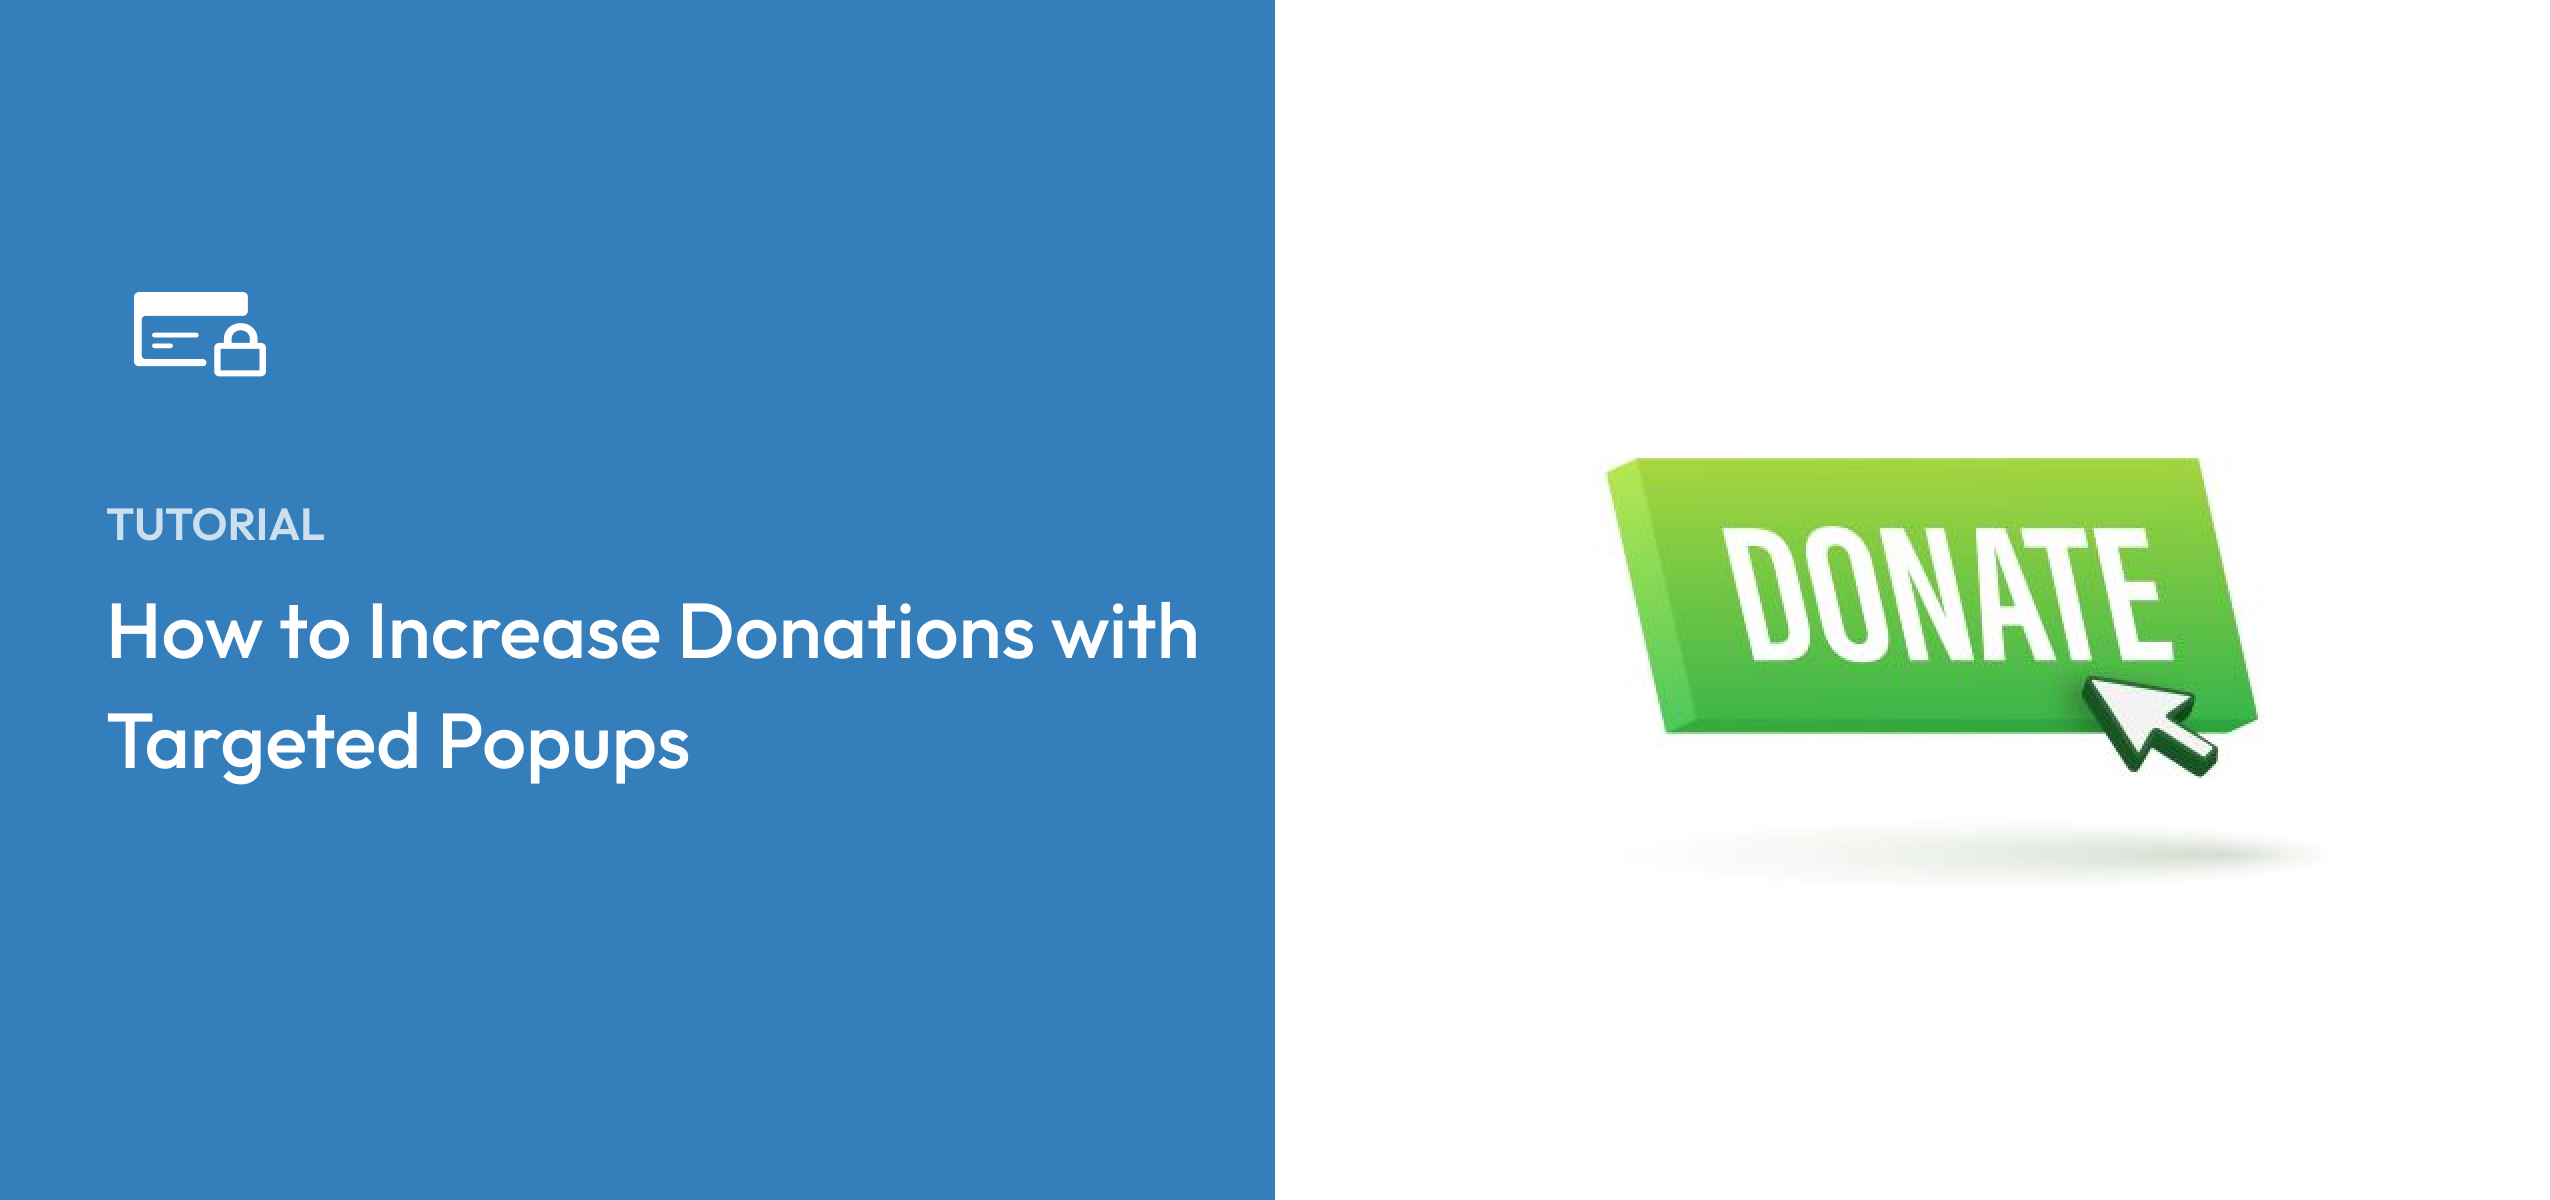 How to Increase Donations with Targeted Popups